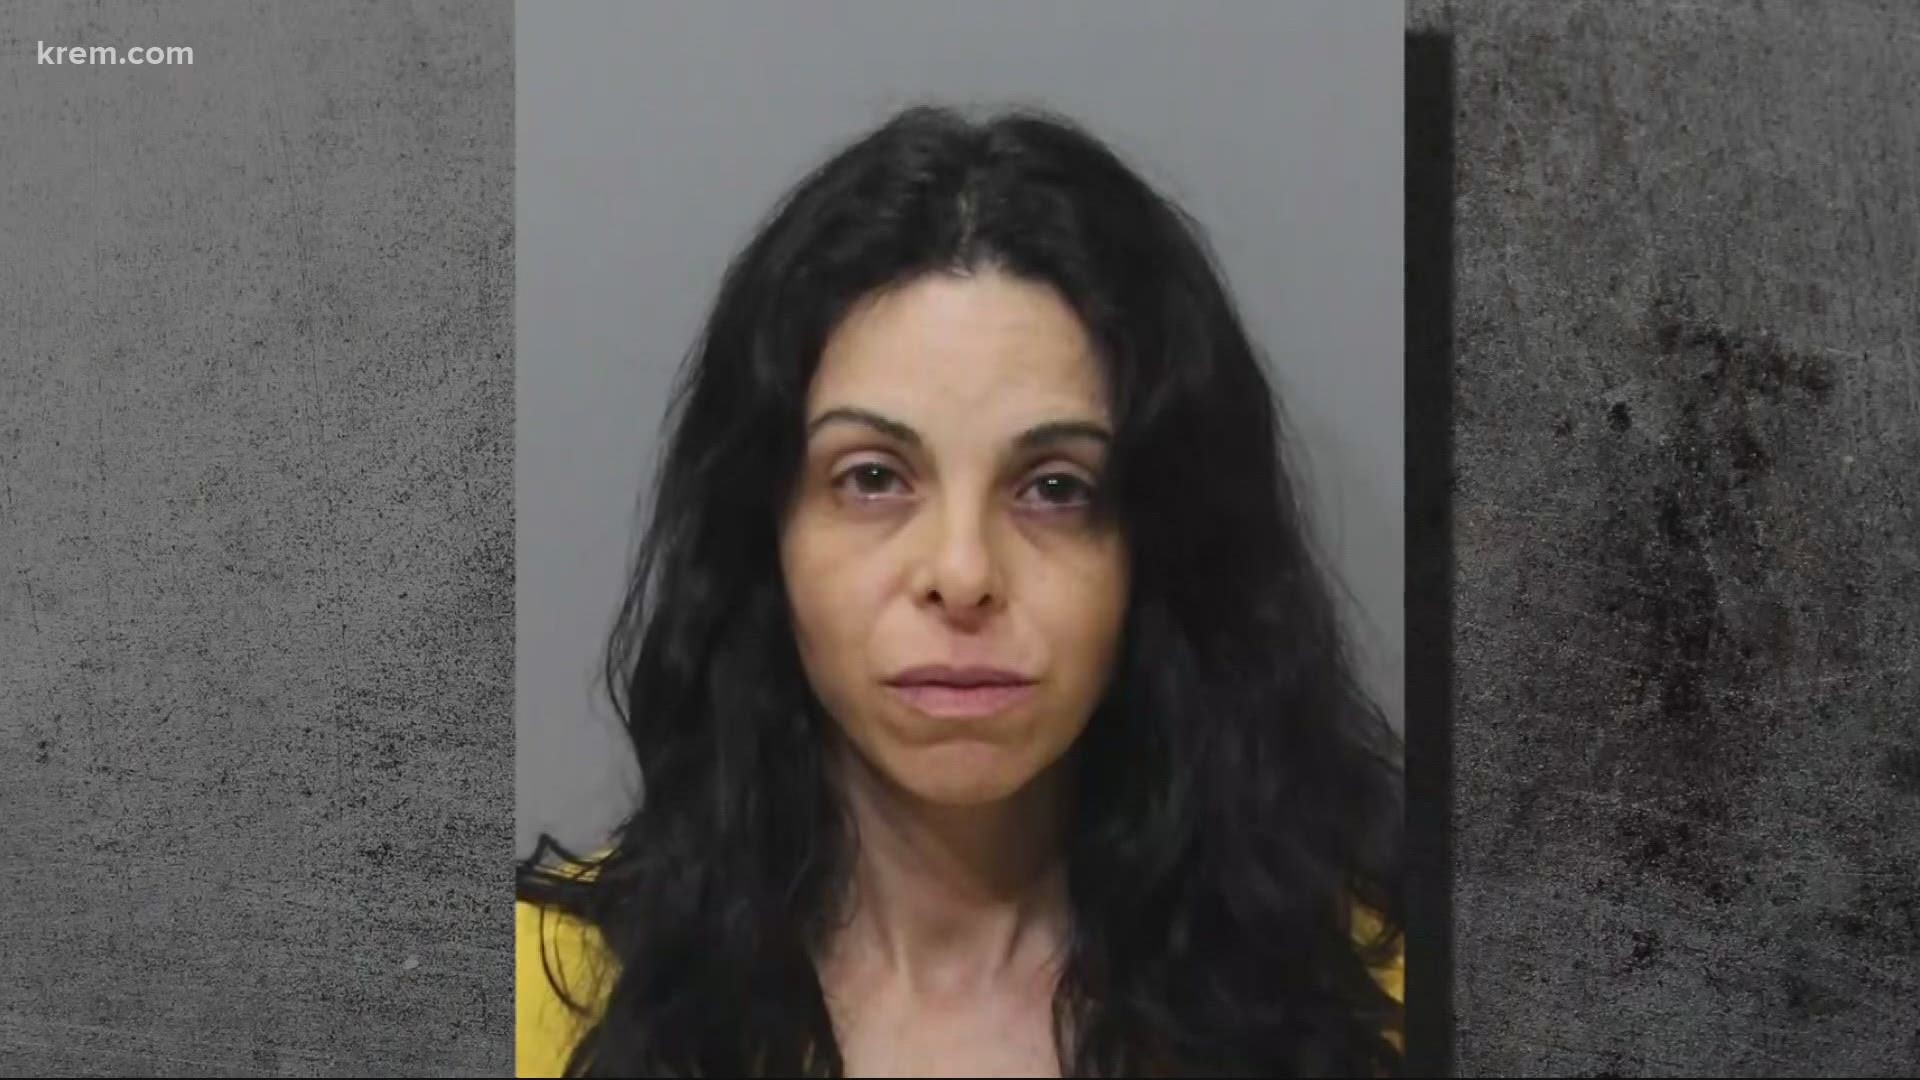 A mother who did not have custody of her four children allegedly abducted them in California more than eight years ago, according to the Department of Justice.